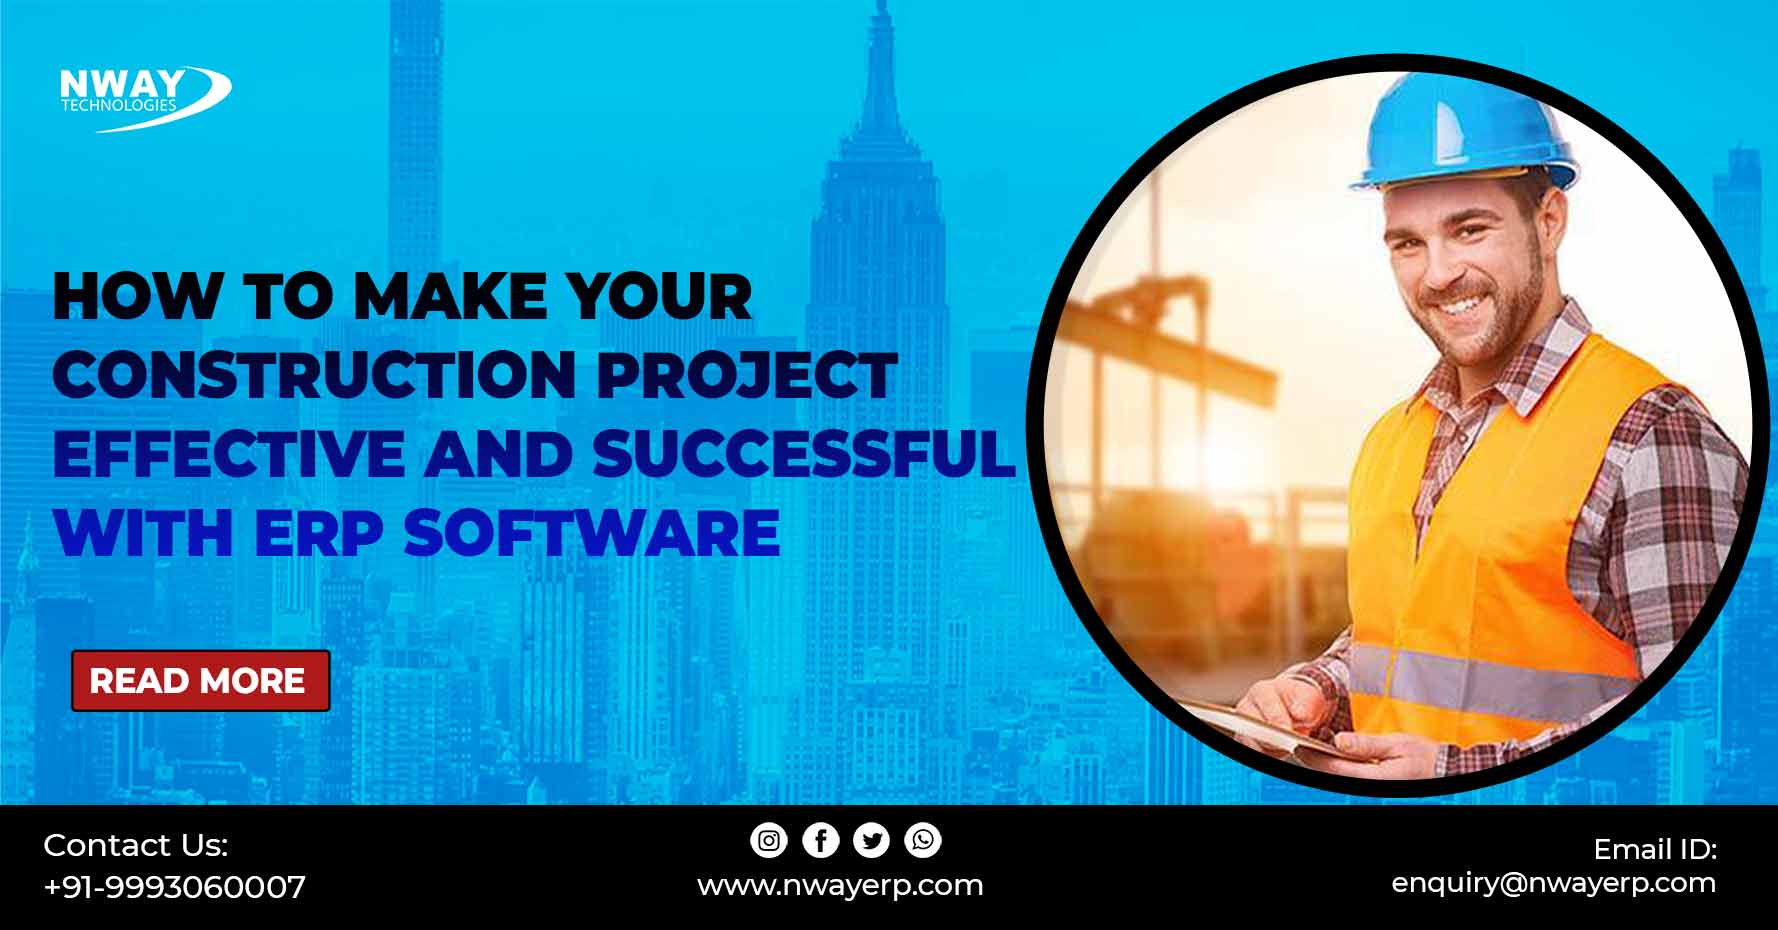 How to Make your Construction Project Effective and Successful with ERP Software?